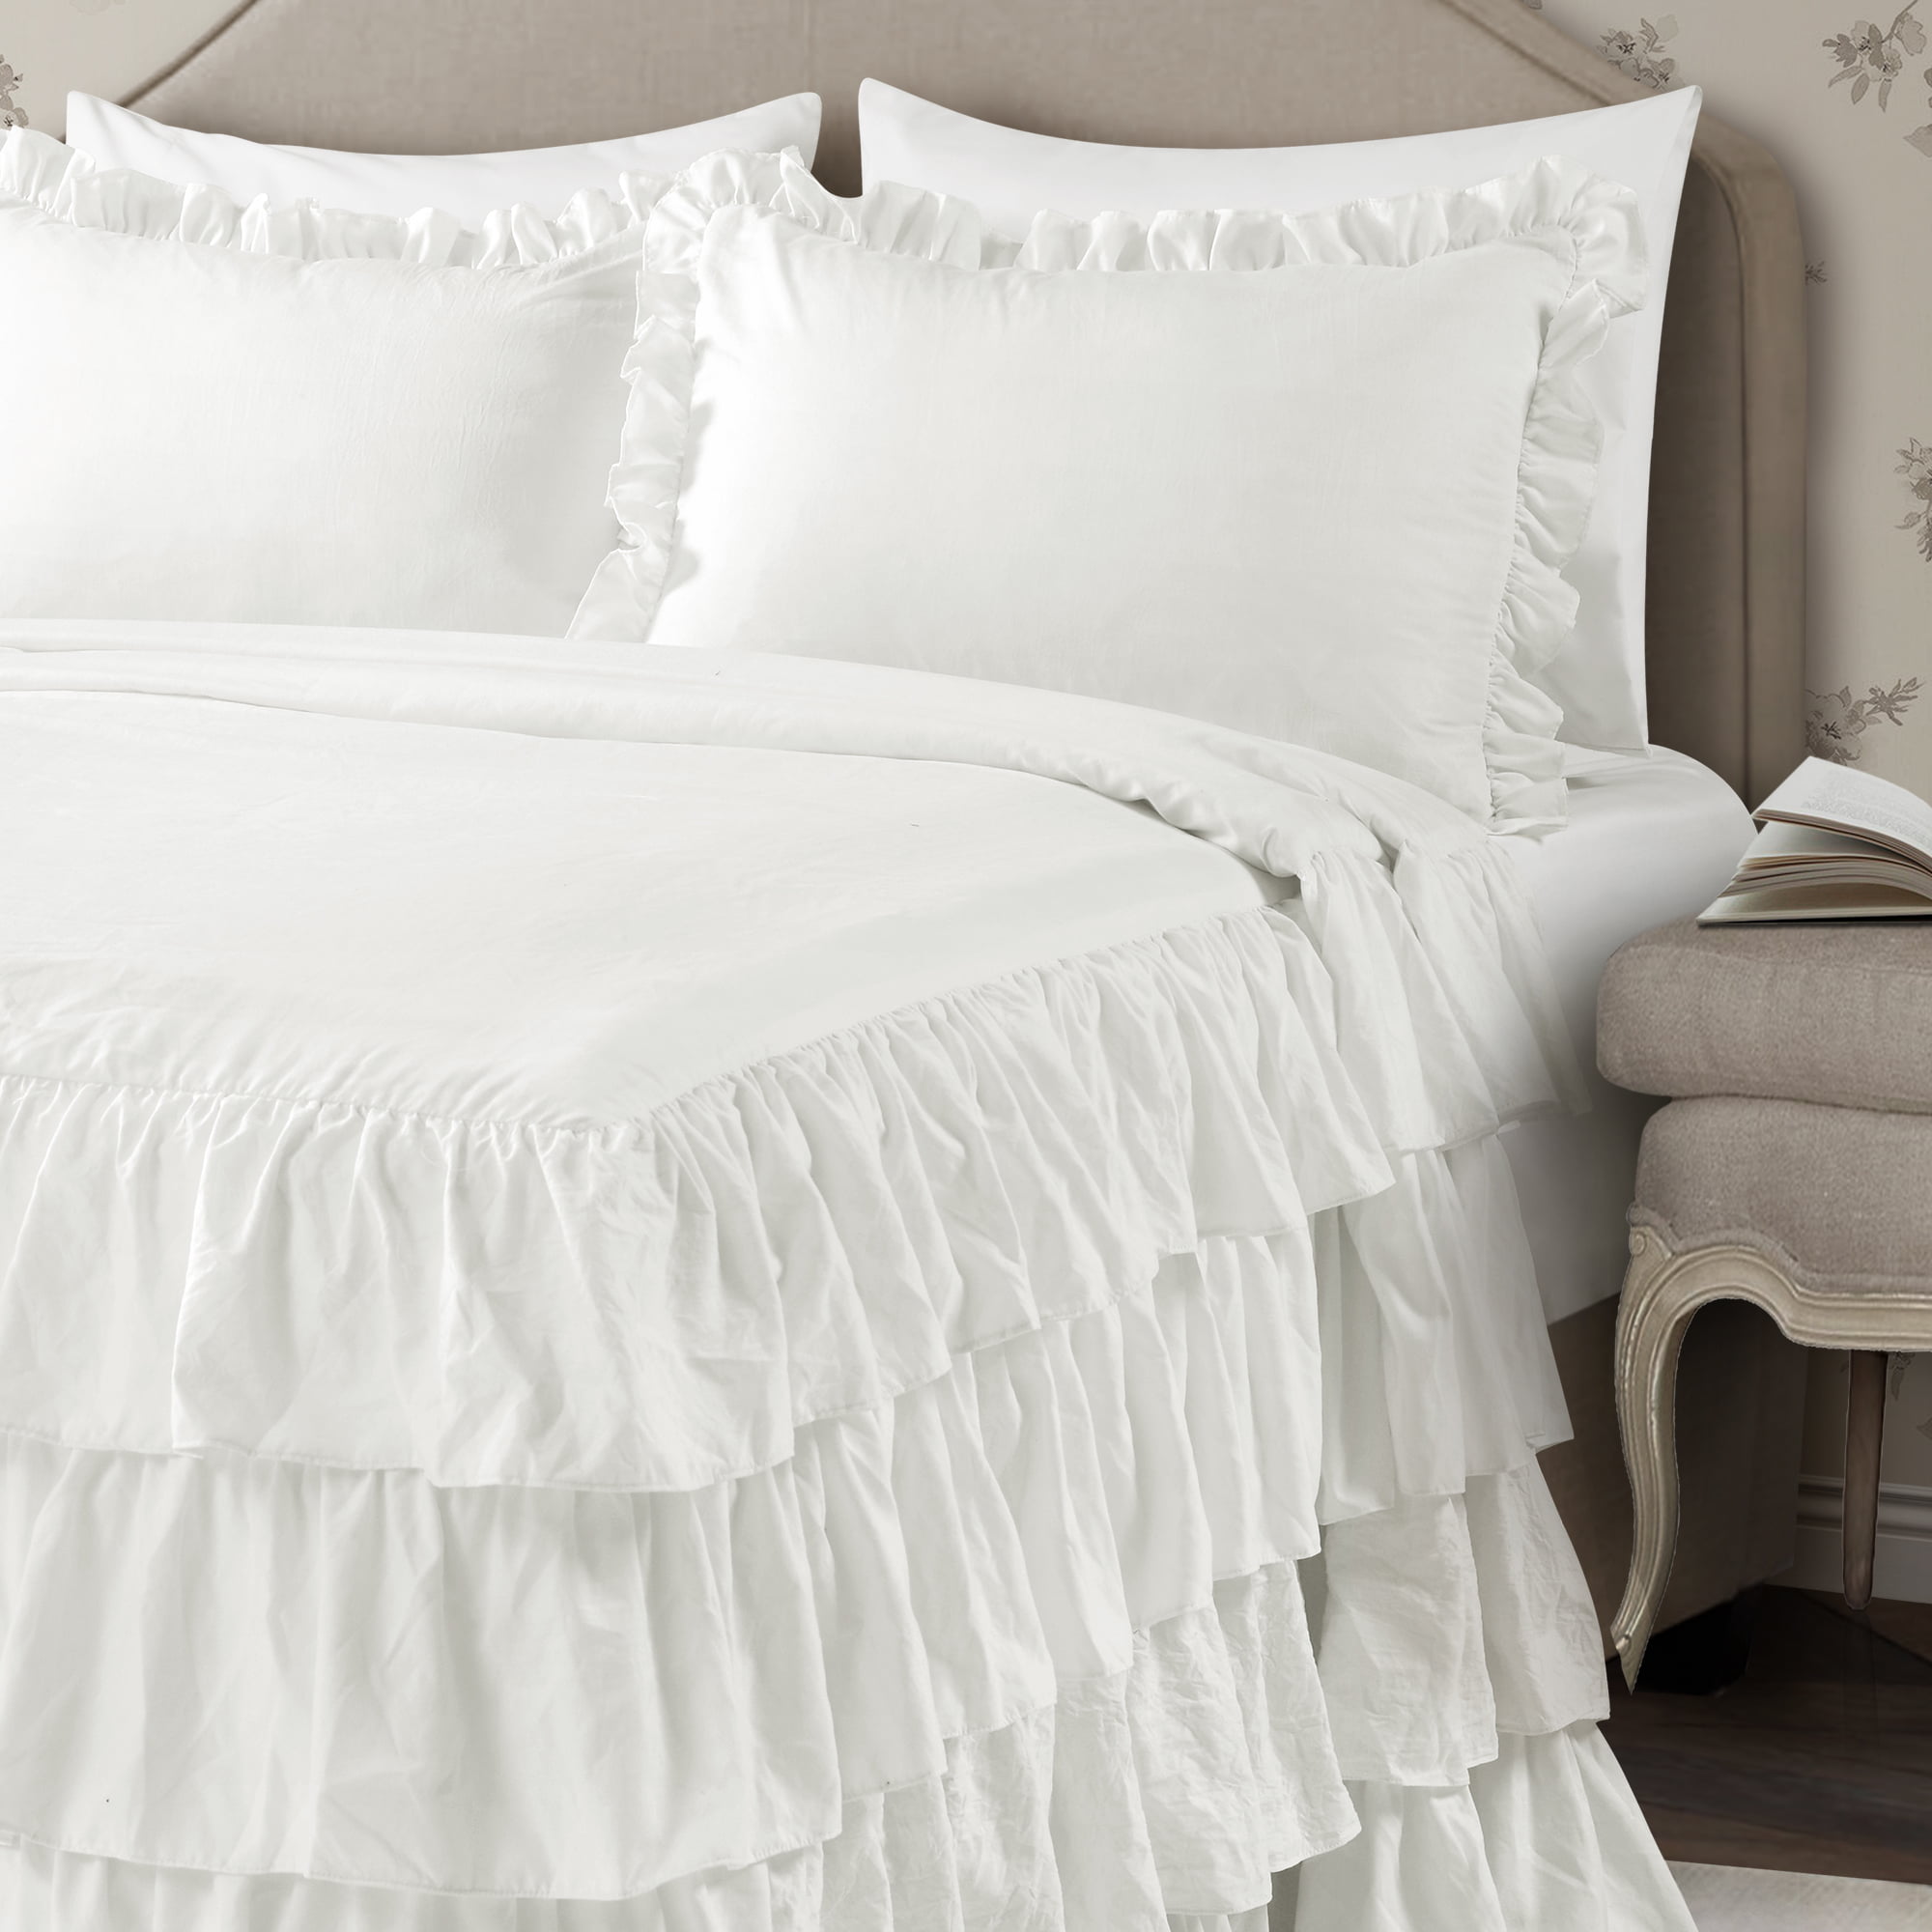 Details about   3-Piece Ruffle Skirt Quilt Set with Shams Channel Stitch Full/Queen Quilt Set, 